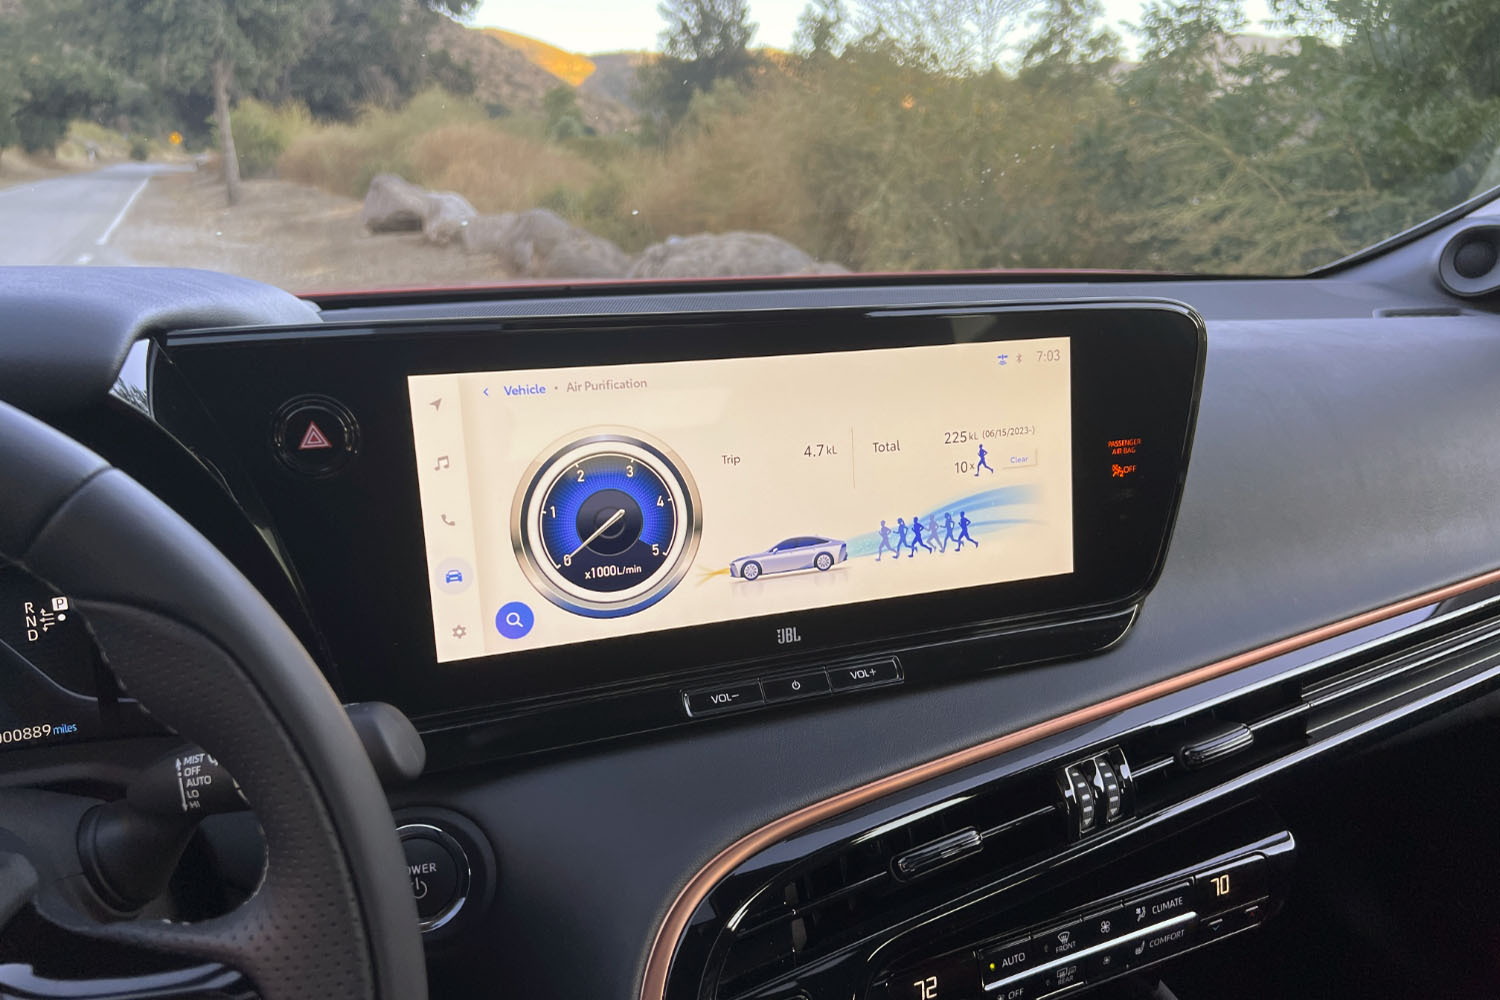 Infotainment screen in the 2023 Toyota Mirai showing air purification information